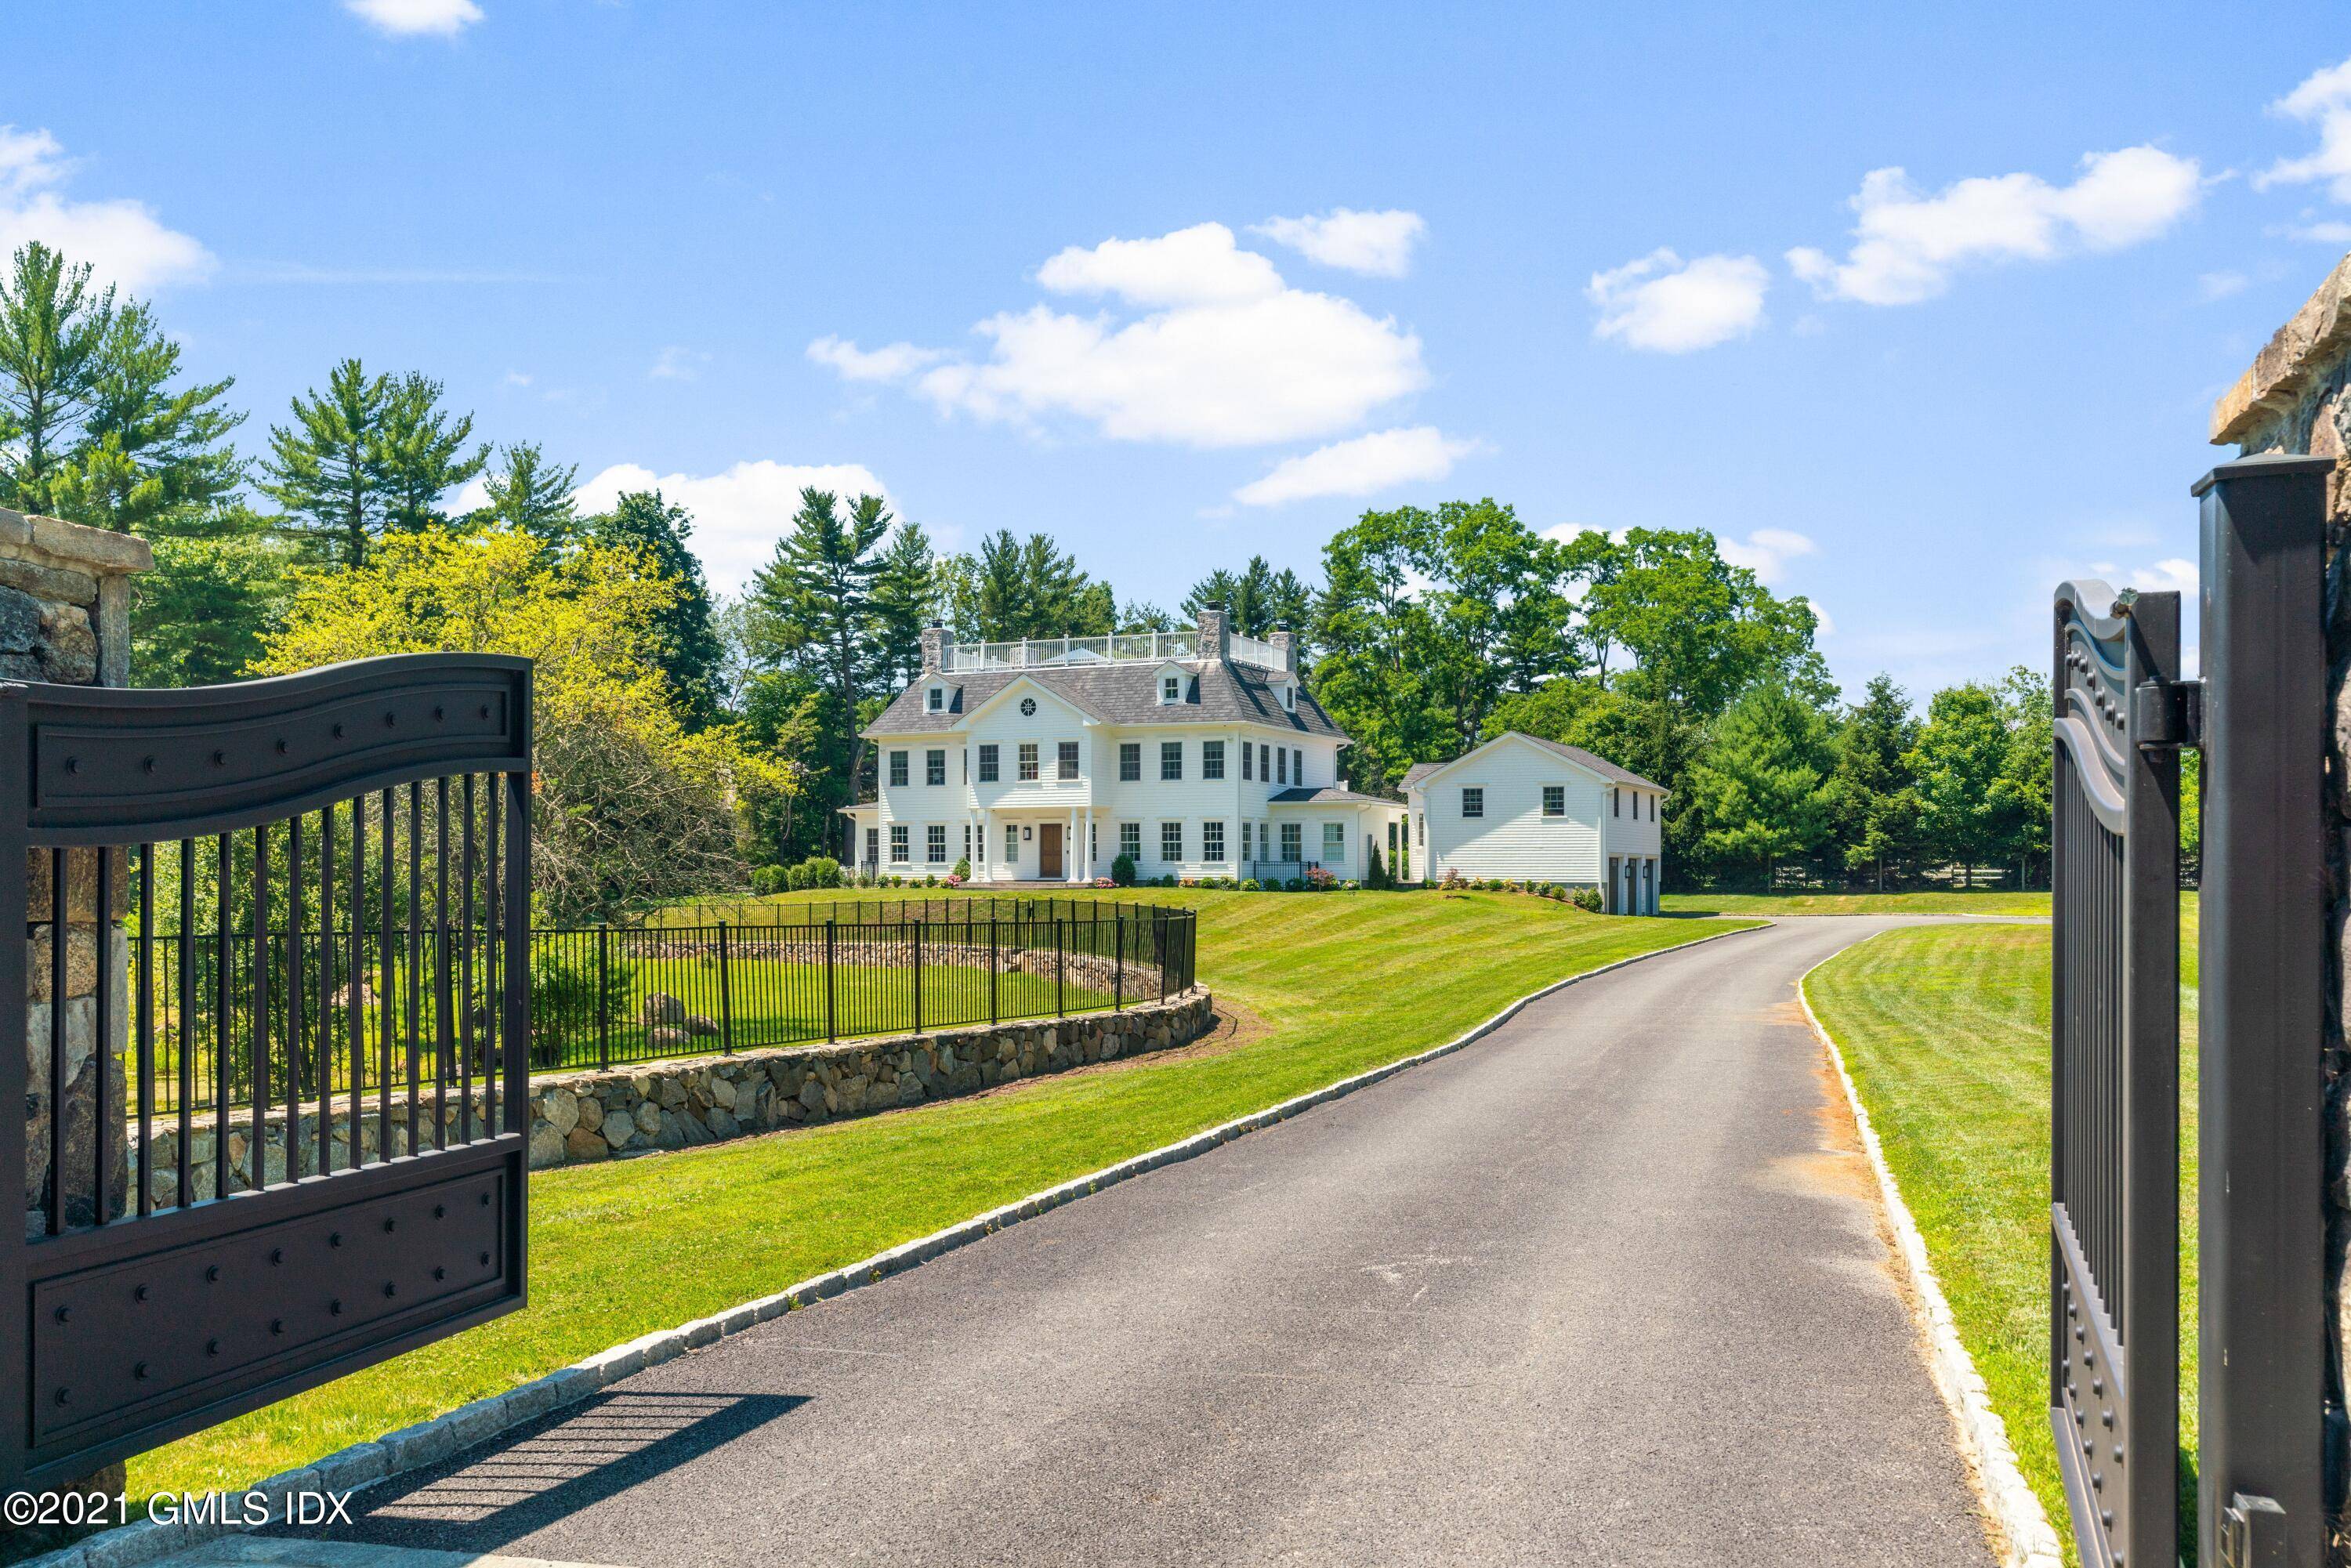 427 Taconic is what happens when a Designer Art Collector puts his stamp on a home.